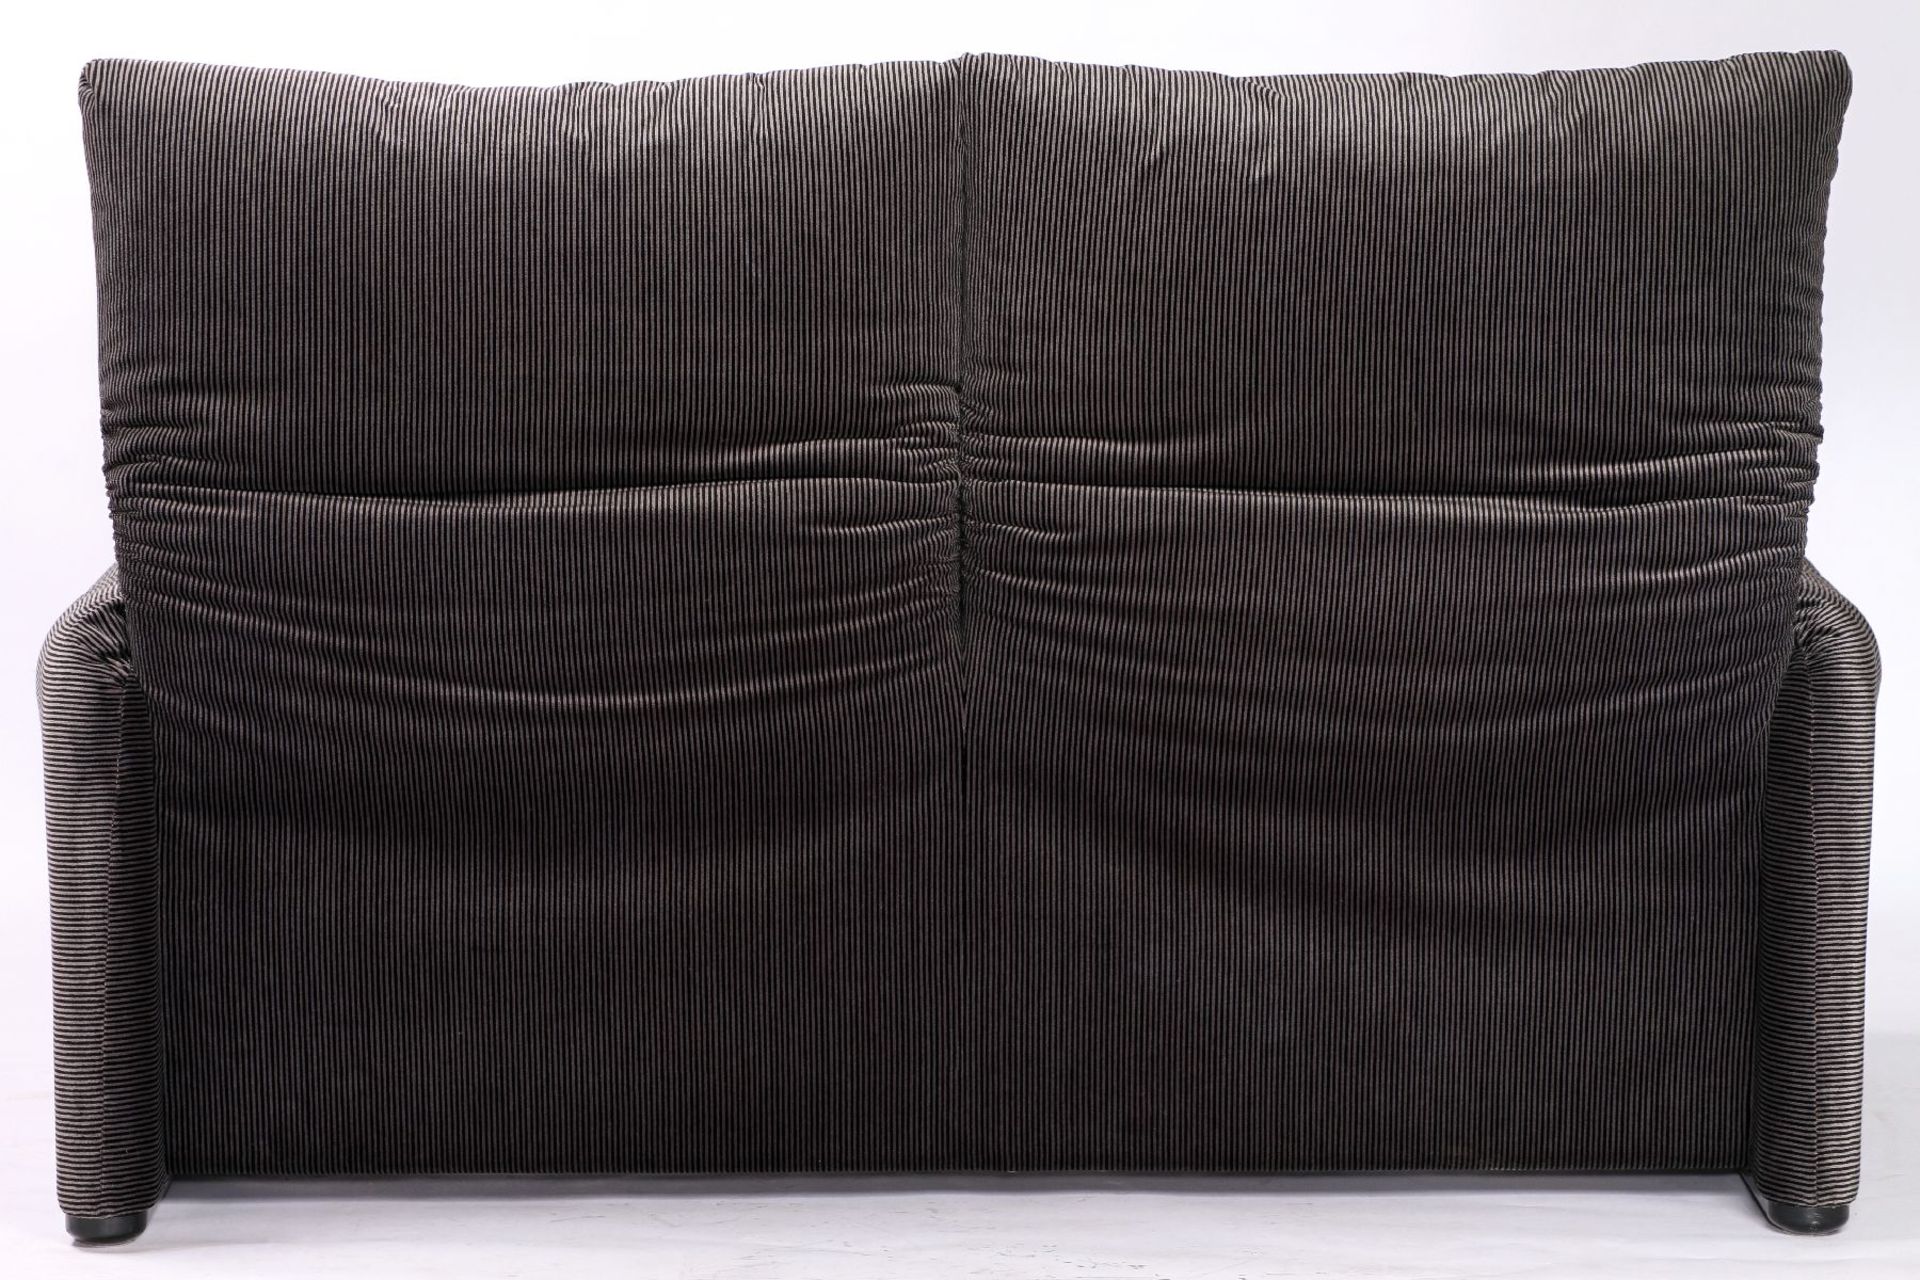 2-Seater Couch "Cassina", made in Italy, Modell: Maralunga, fabric cover vertical striped grey and - Bild 3 aus 5